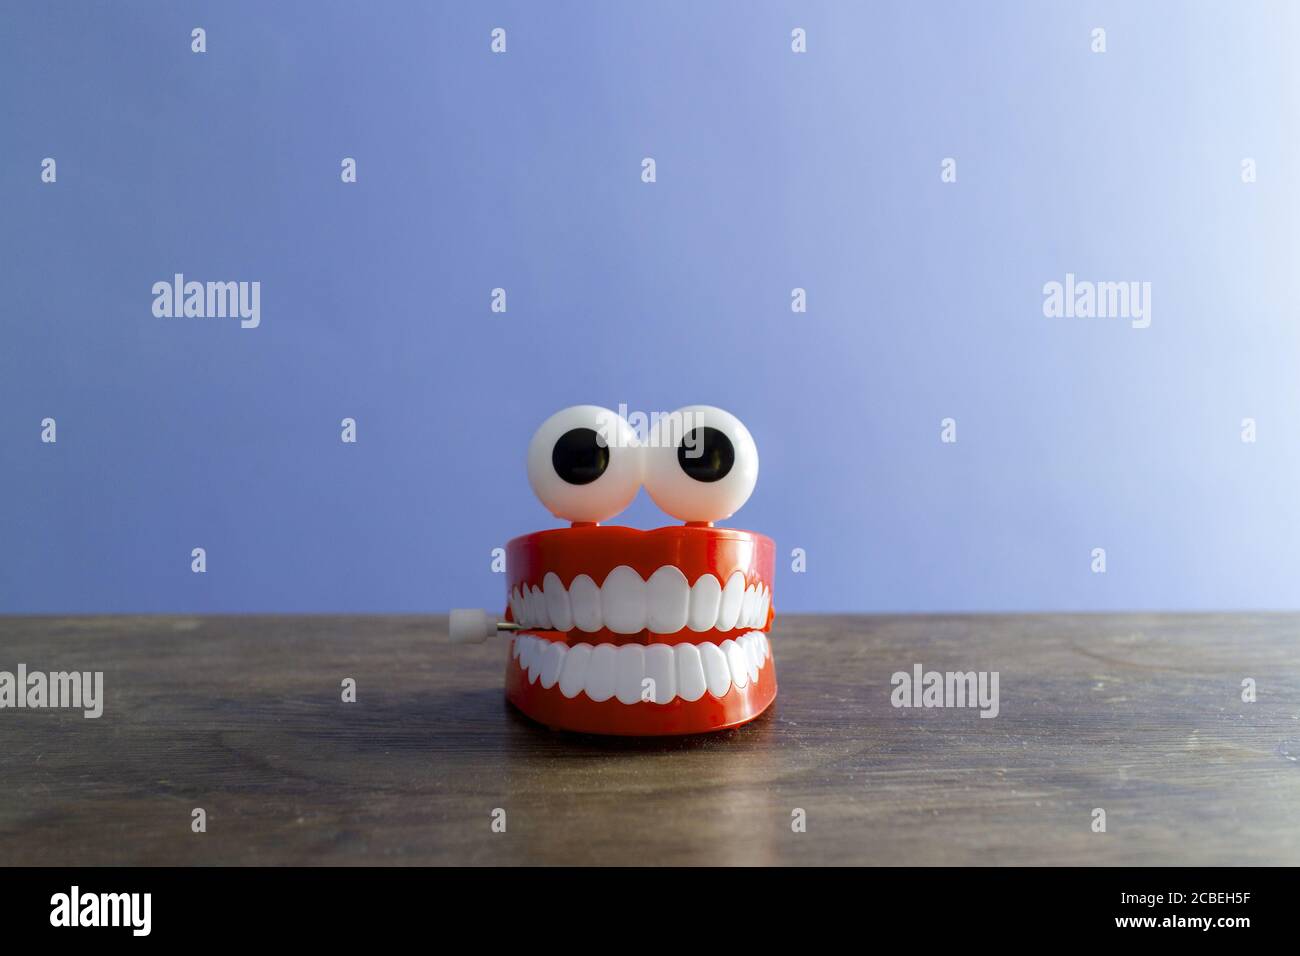 Set of chattering toy teeth with eyes, looking like a cartoon character or mascot Stock Photo